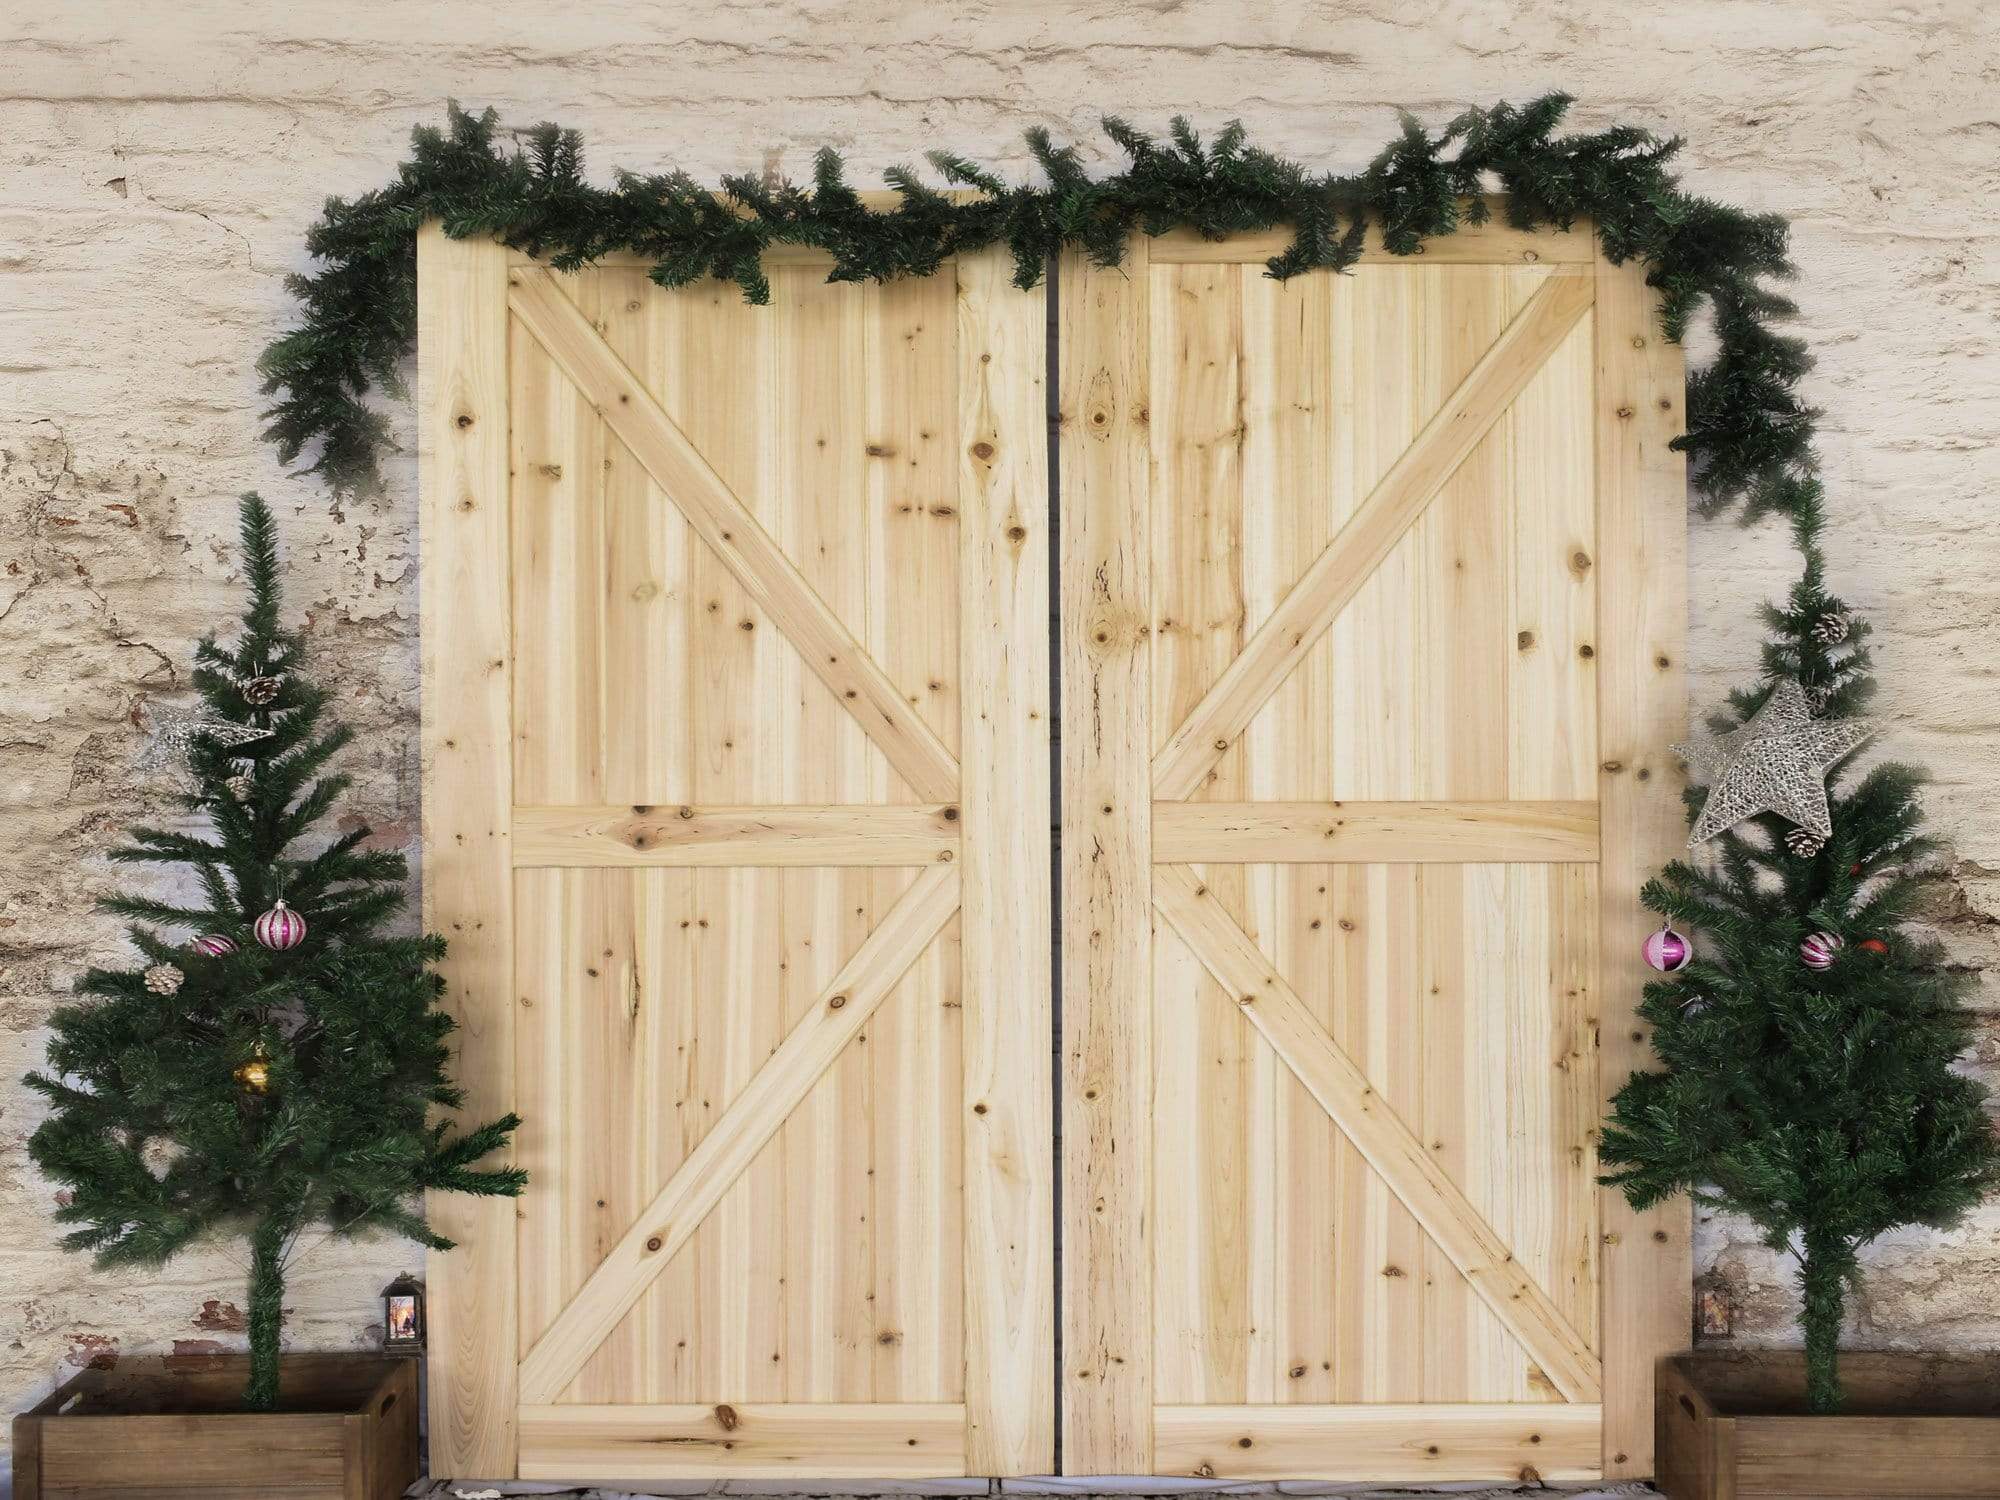 Kate Christmas Barn Door Pinetrees Decorations Backdrop Designed By Jerry_Sina